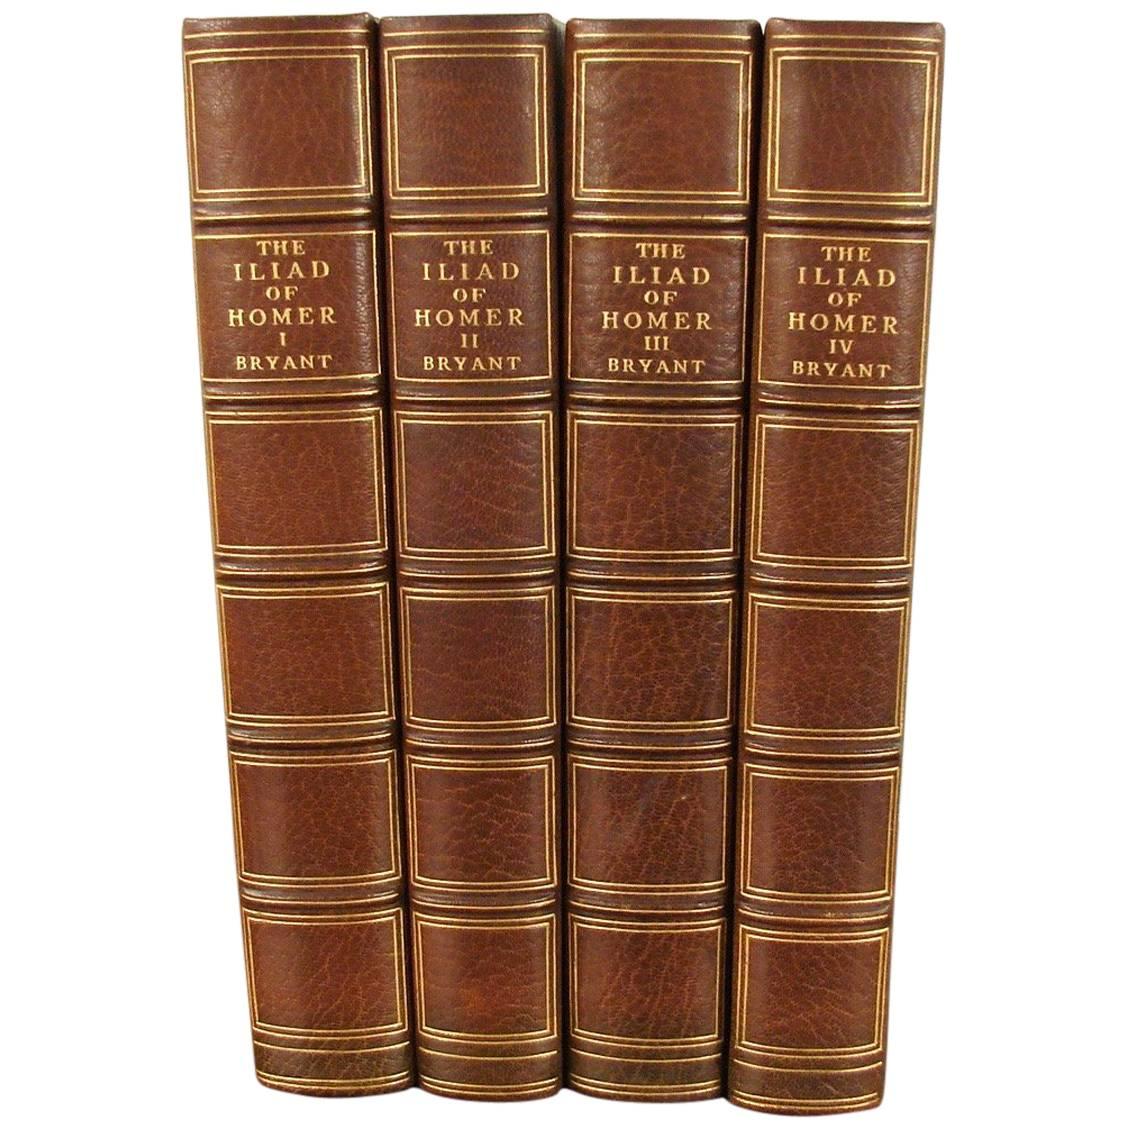 Homer's Illiad Limited Edition in Four Volume Leather Bound Set 